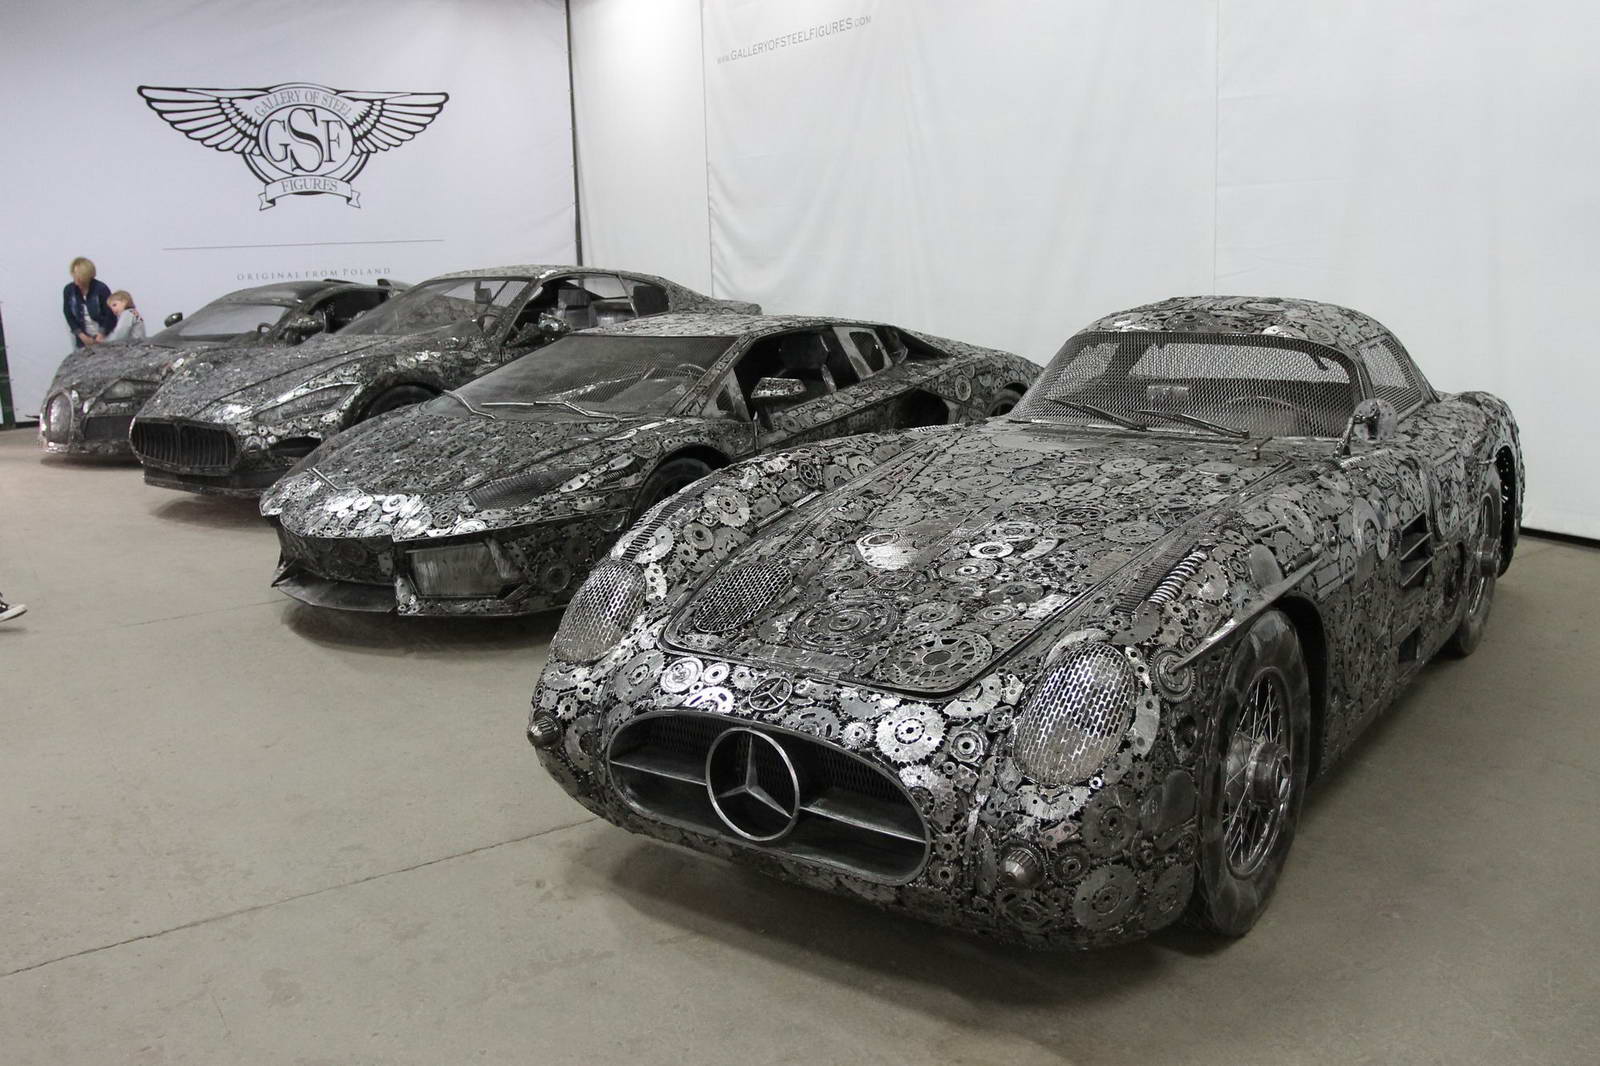 Artists Recycle Scrap Metal Into Supercars